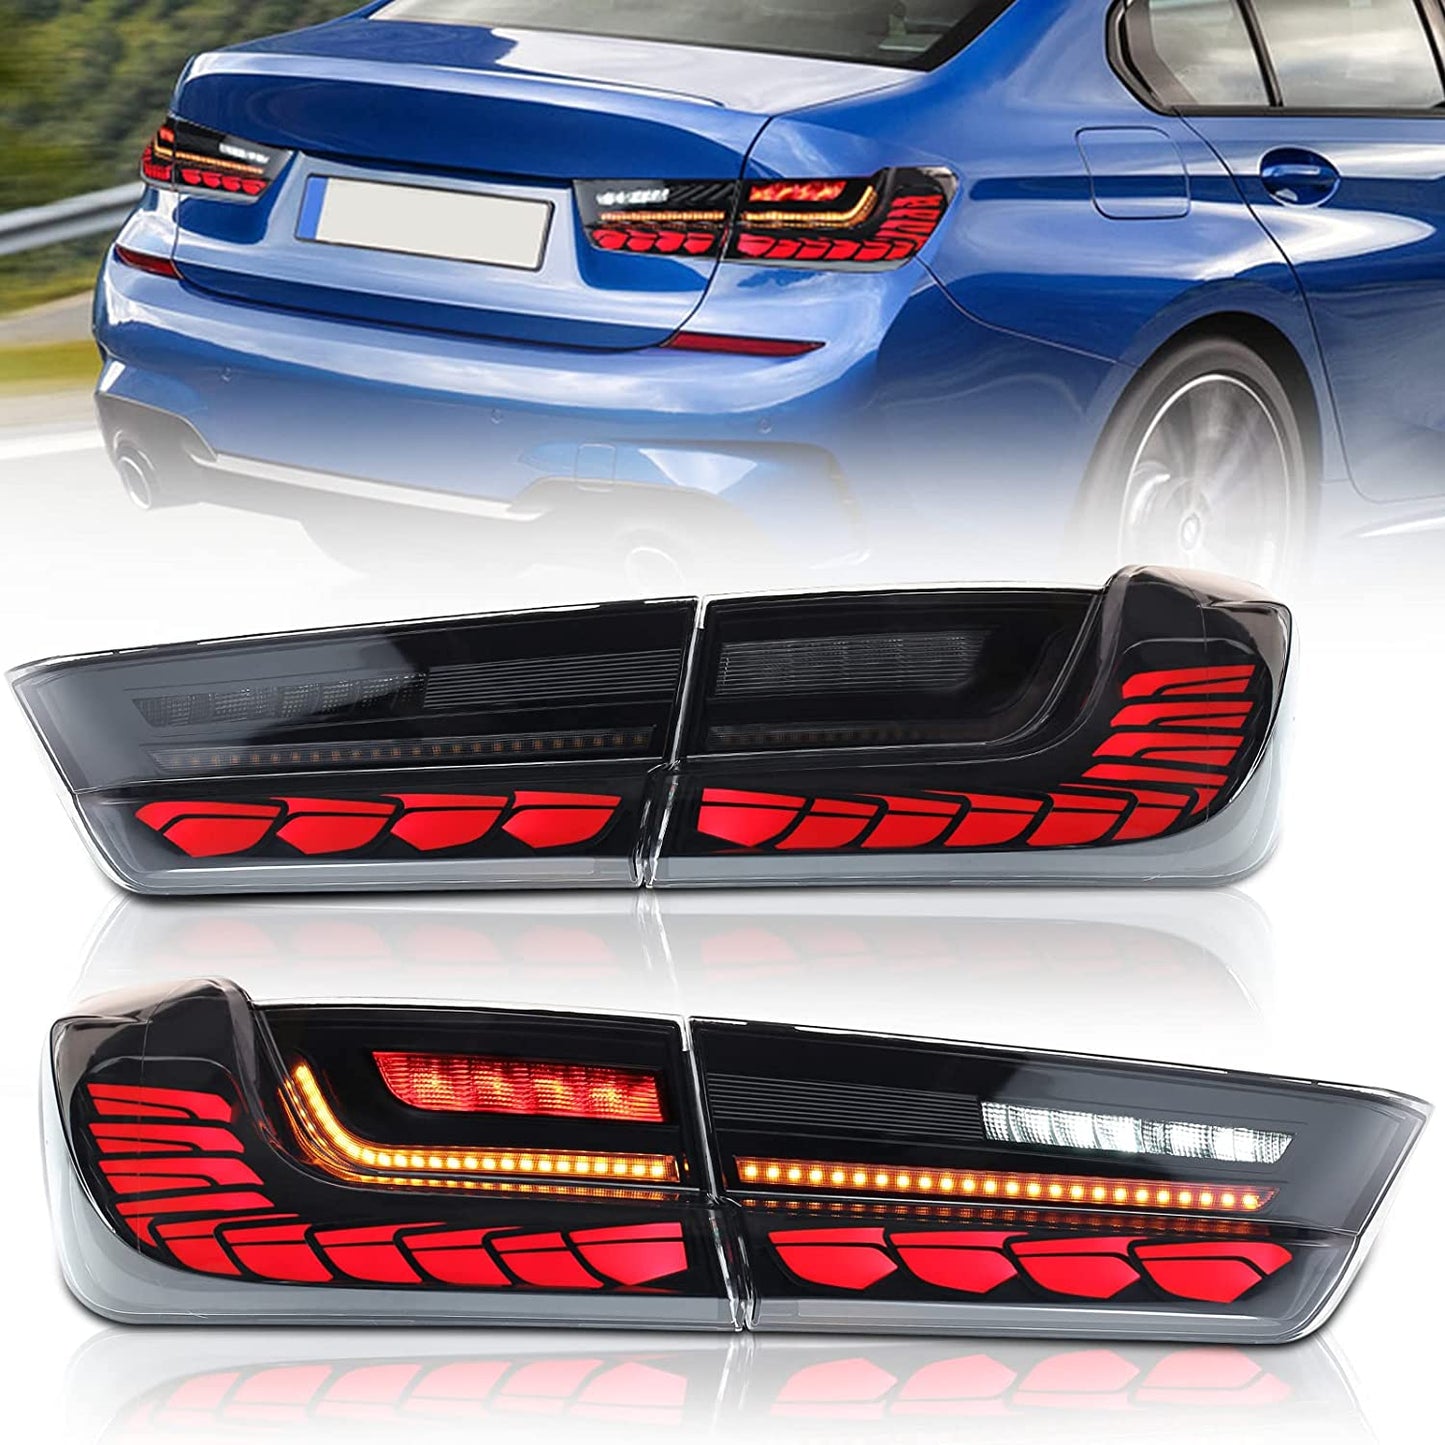 JOLUNG Full LED Tail Lights Assembly For BMW 3 Series G20 330i/330i Xdrive 2020-2021（Smoked）